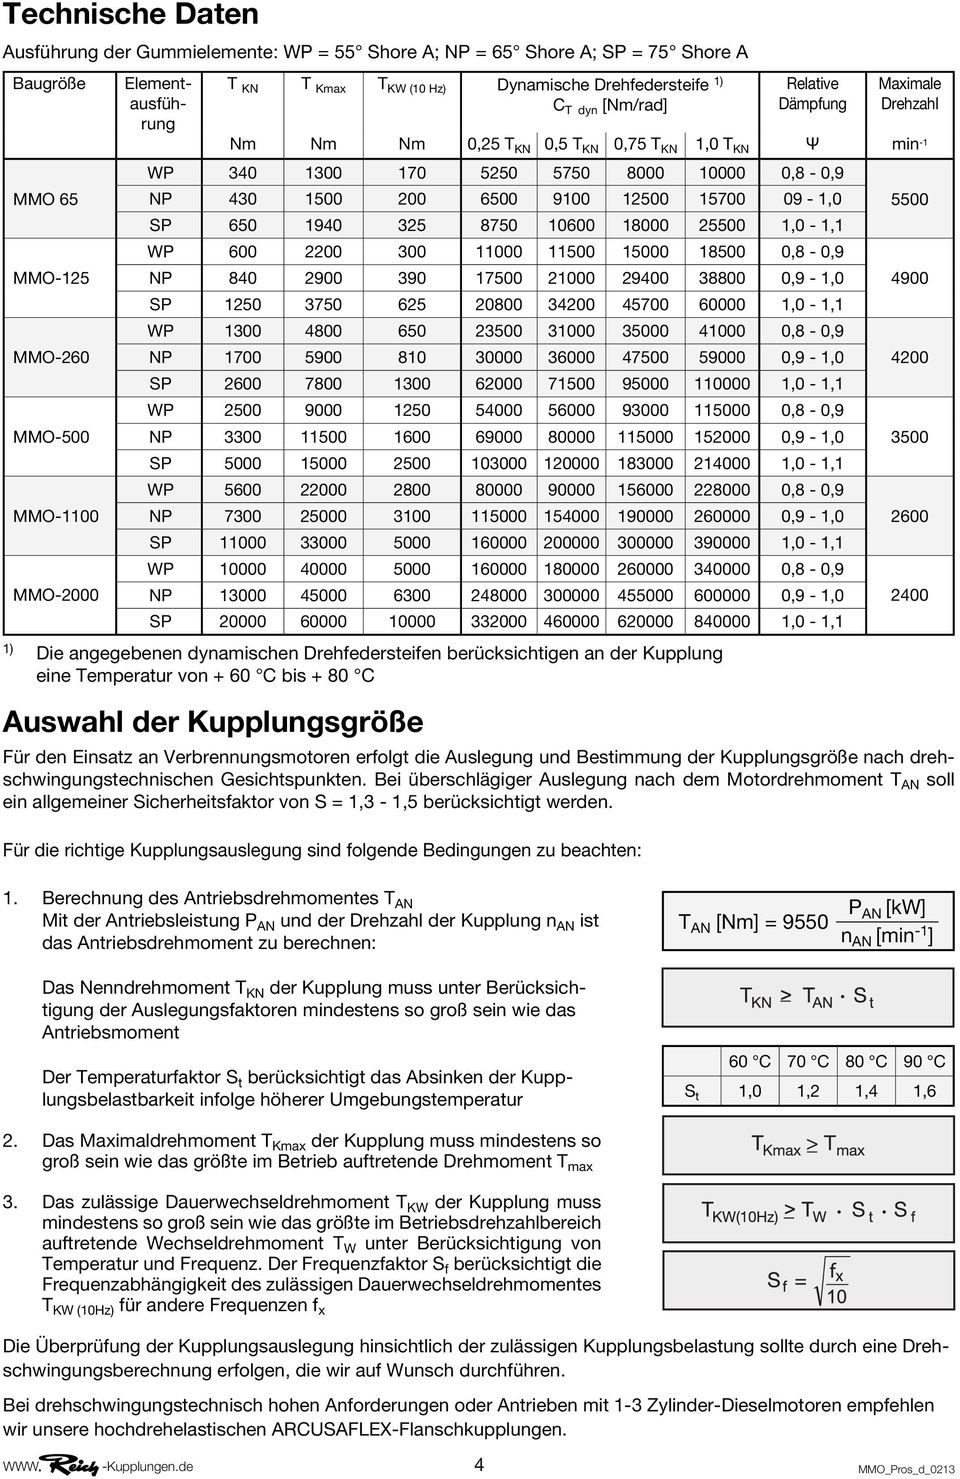 KN 1,0 T KN Relative Dämpfung WP 340 1300 170 5250 5750 8000 10000 0,8-0,9 NP 430 1500 200 6500 9100 12500 15700 09-1,0 SP 650 1940 325 8750 10600 18000 25500 1,0-1,1 WP 600 2200 300 11000 11500